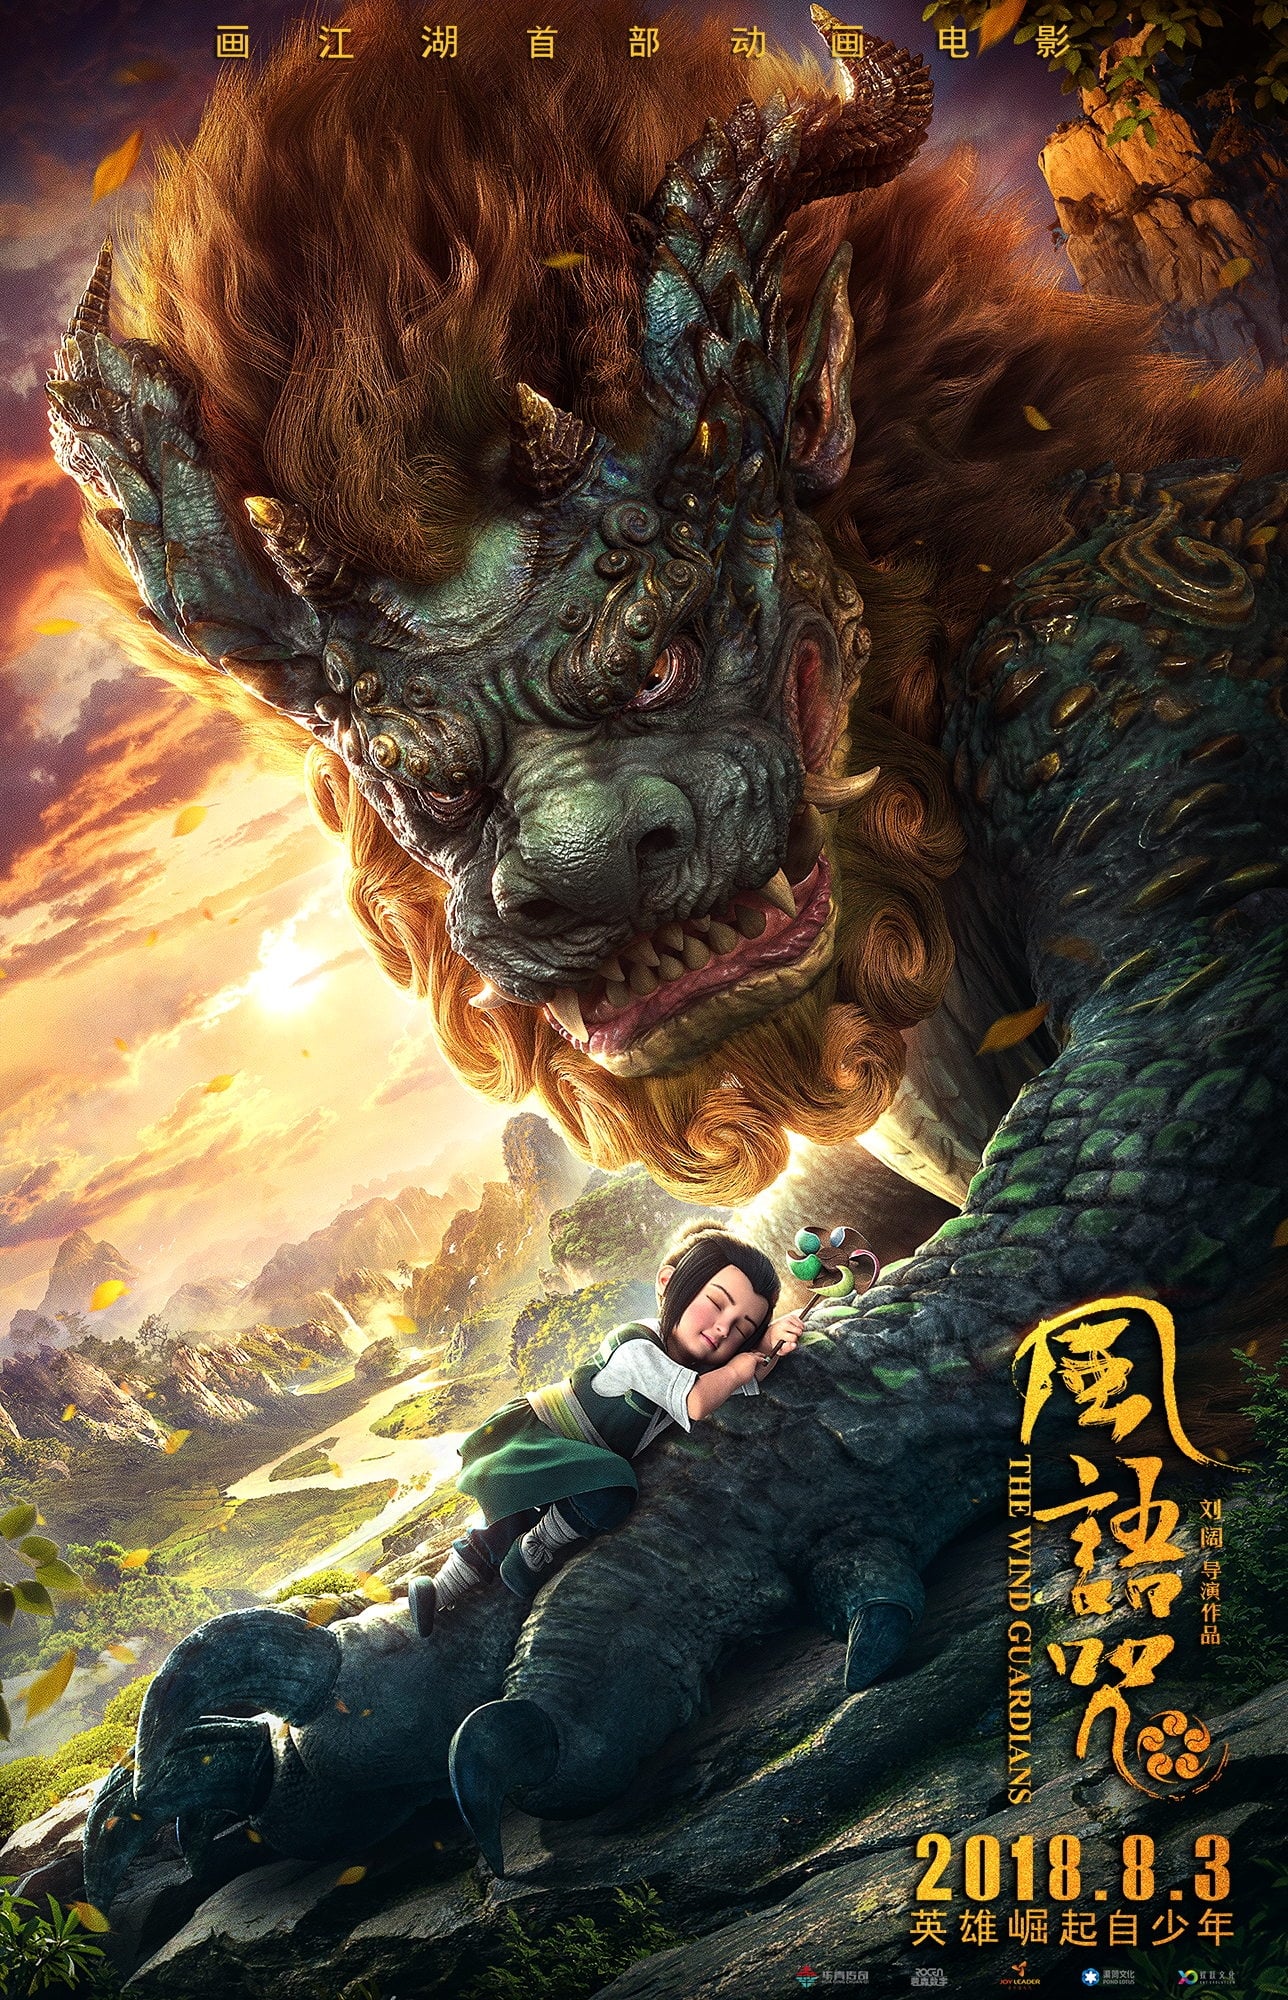 Poster for the movie "The Wind Guardians"